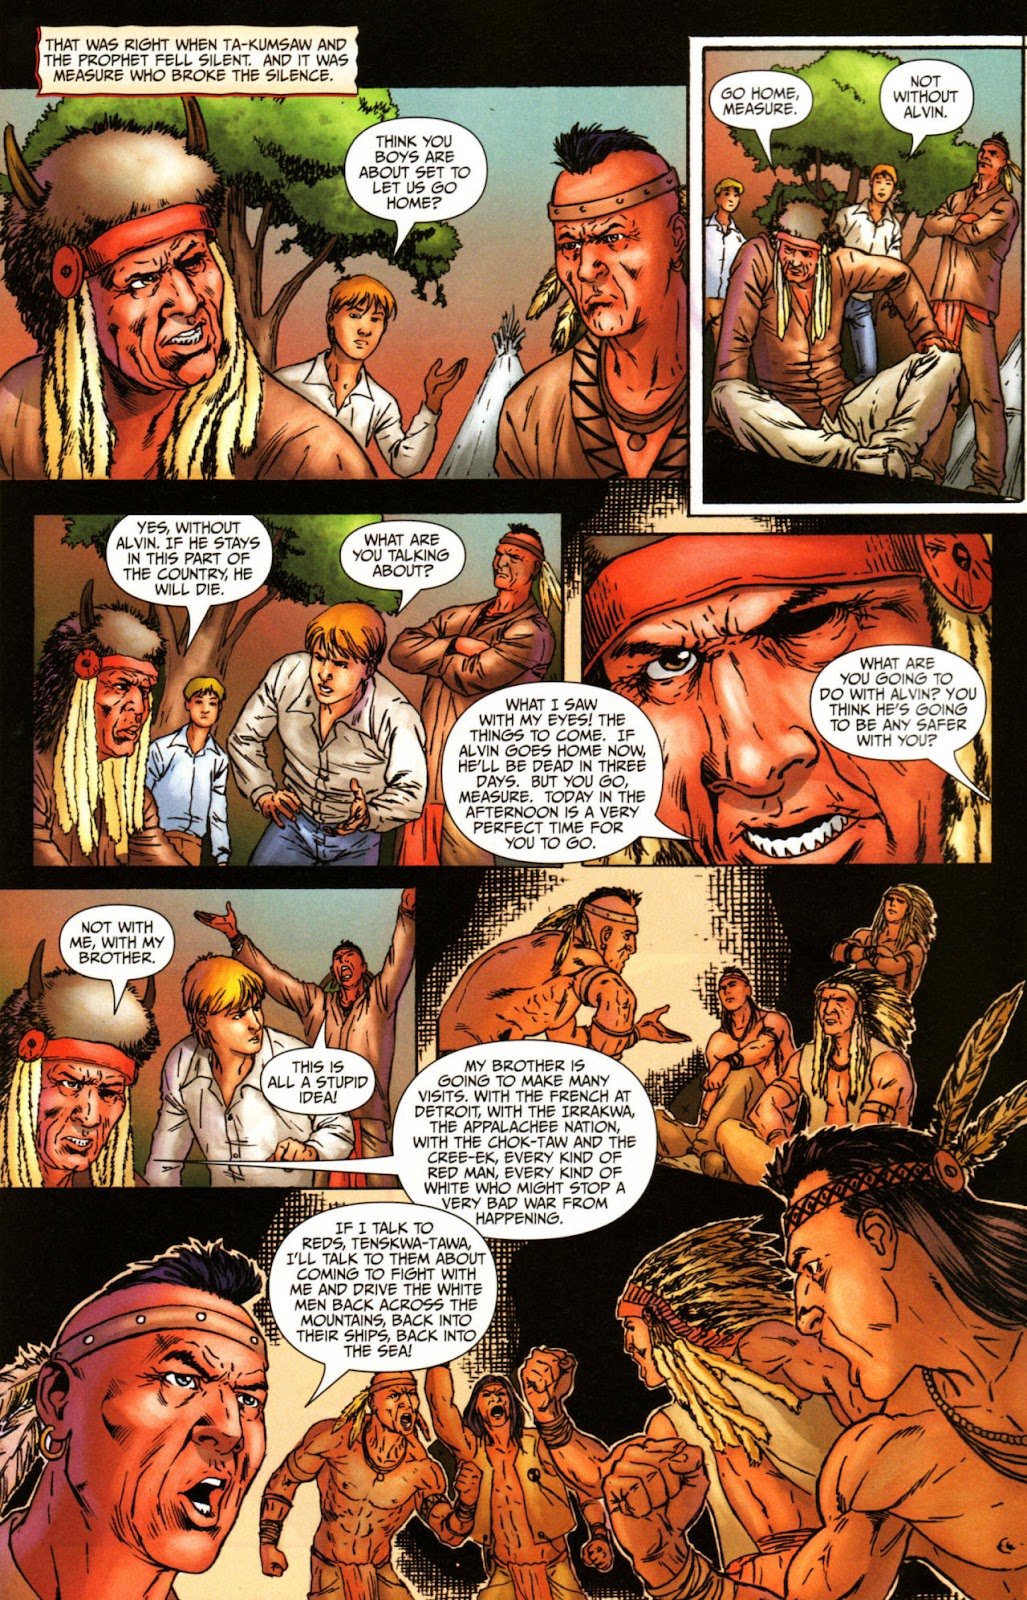 Red Prophet: The Tales of Alvin Maker issue 7 - Page 10